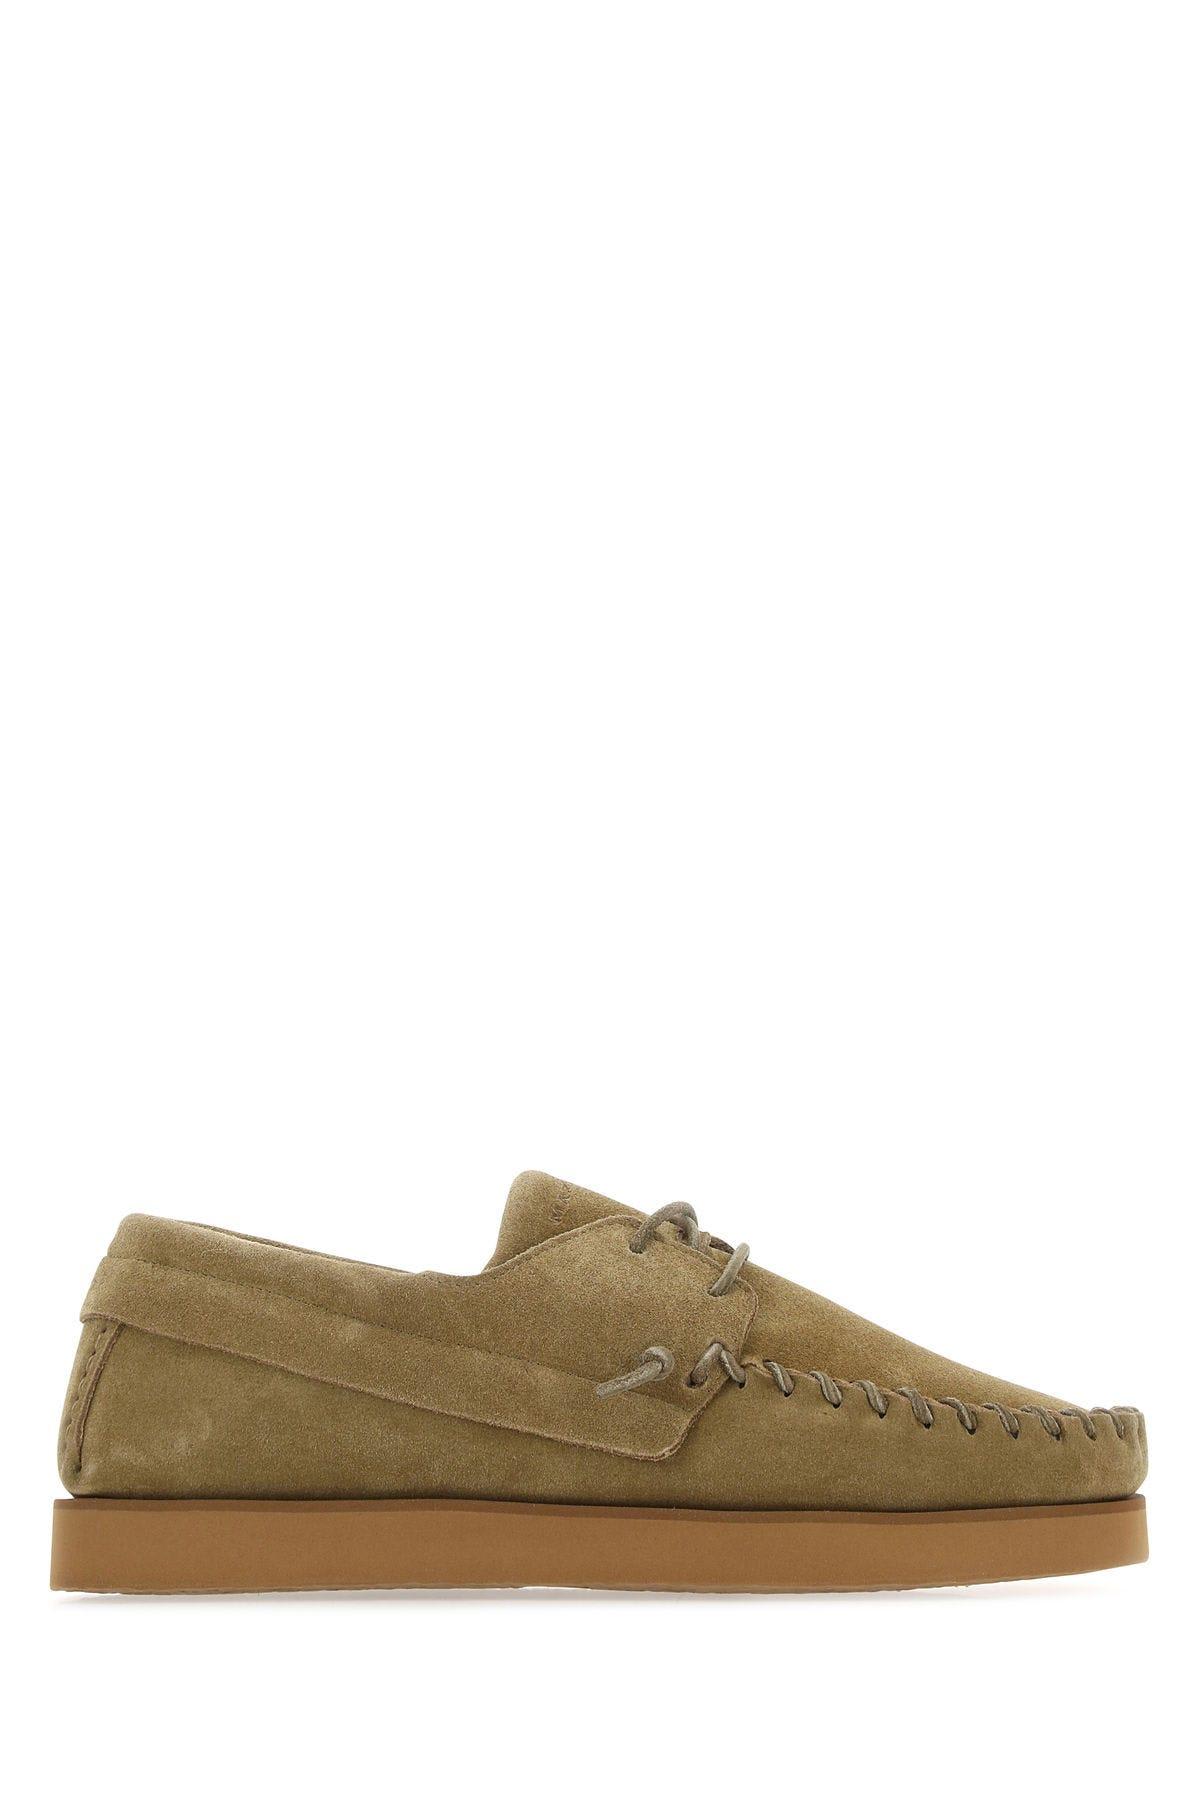 ISABEL MARANT MUD SUEDE LACE-UP SHOES